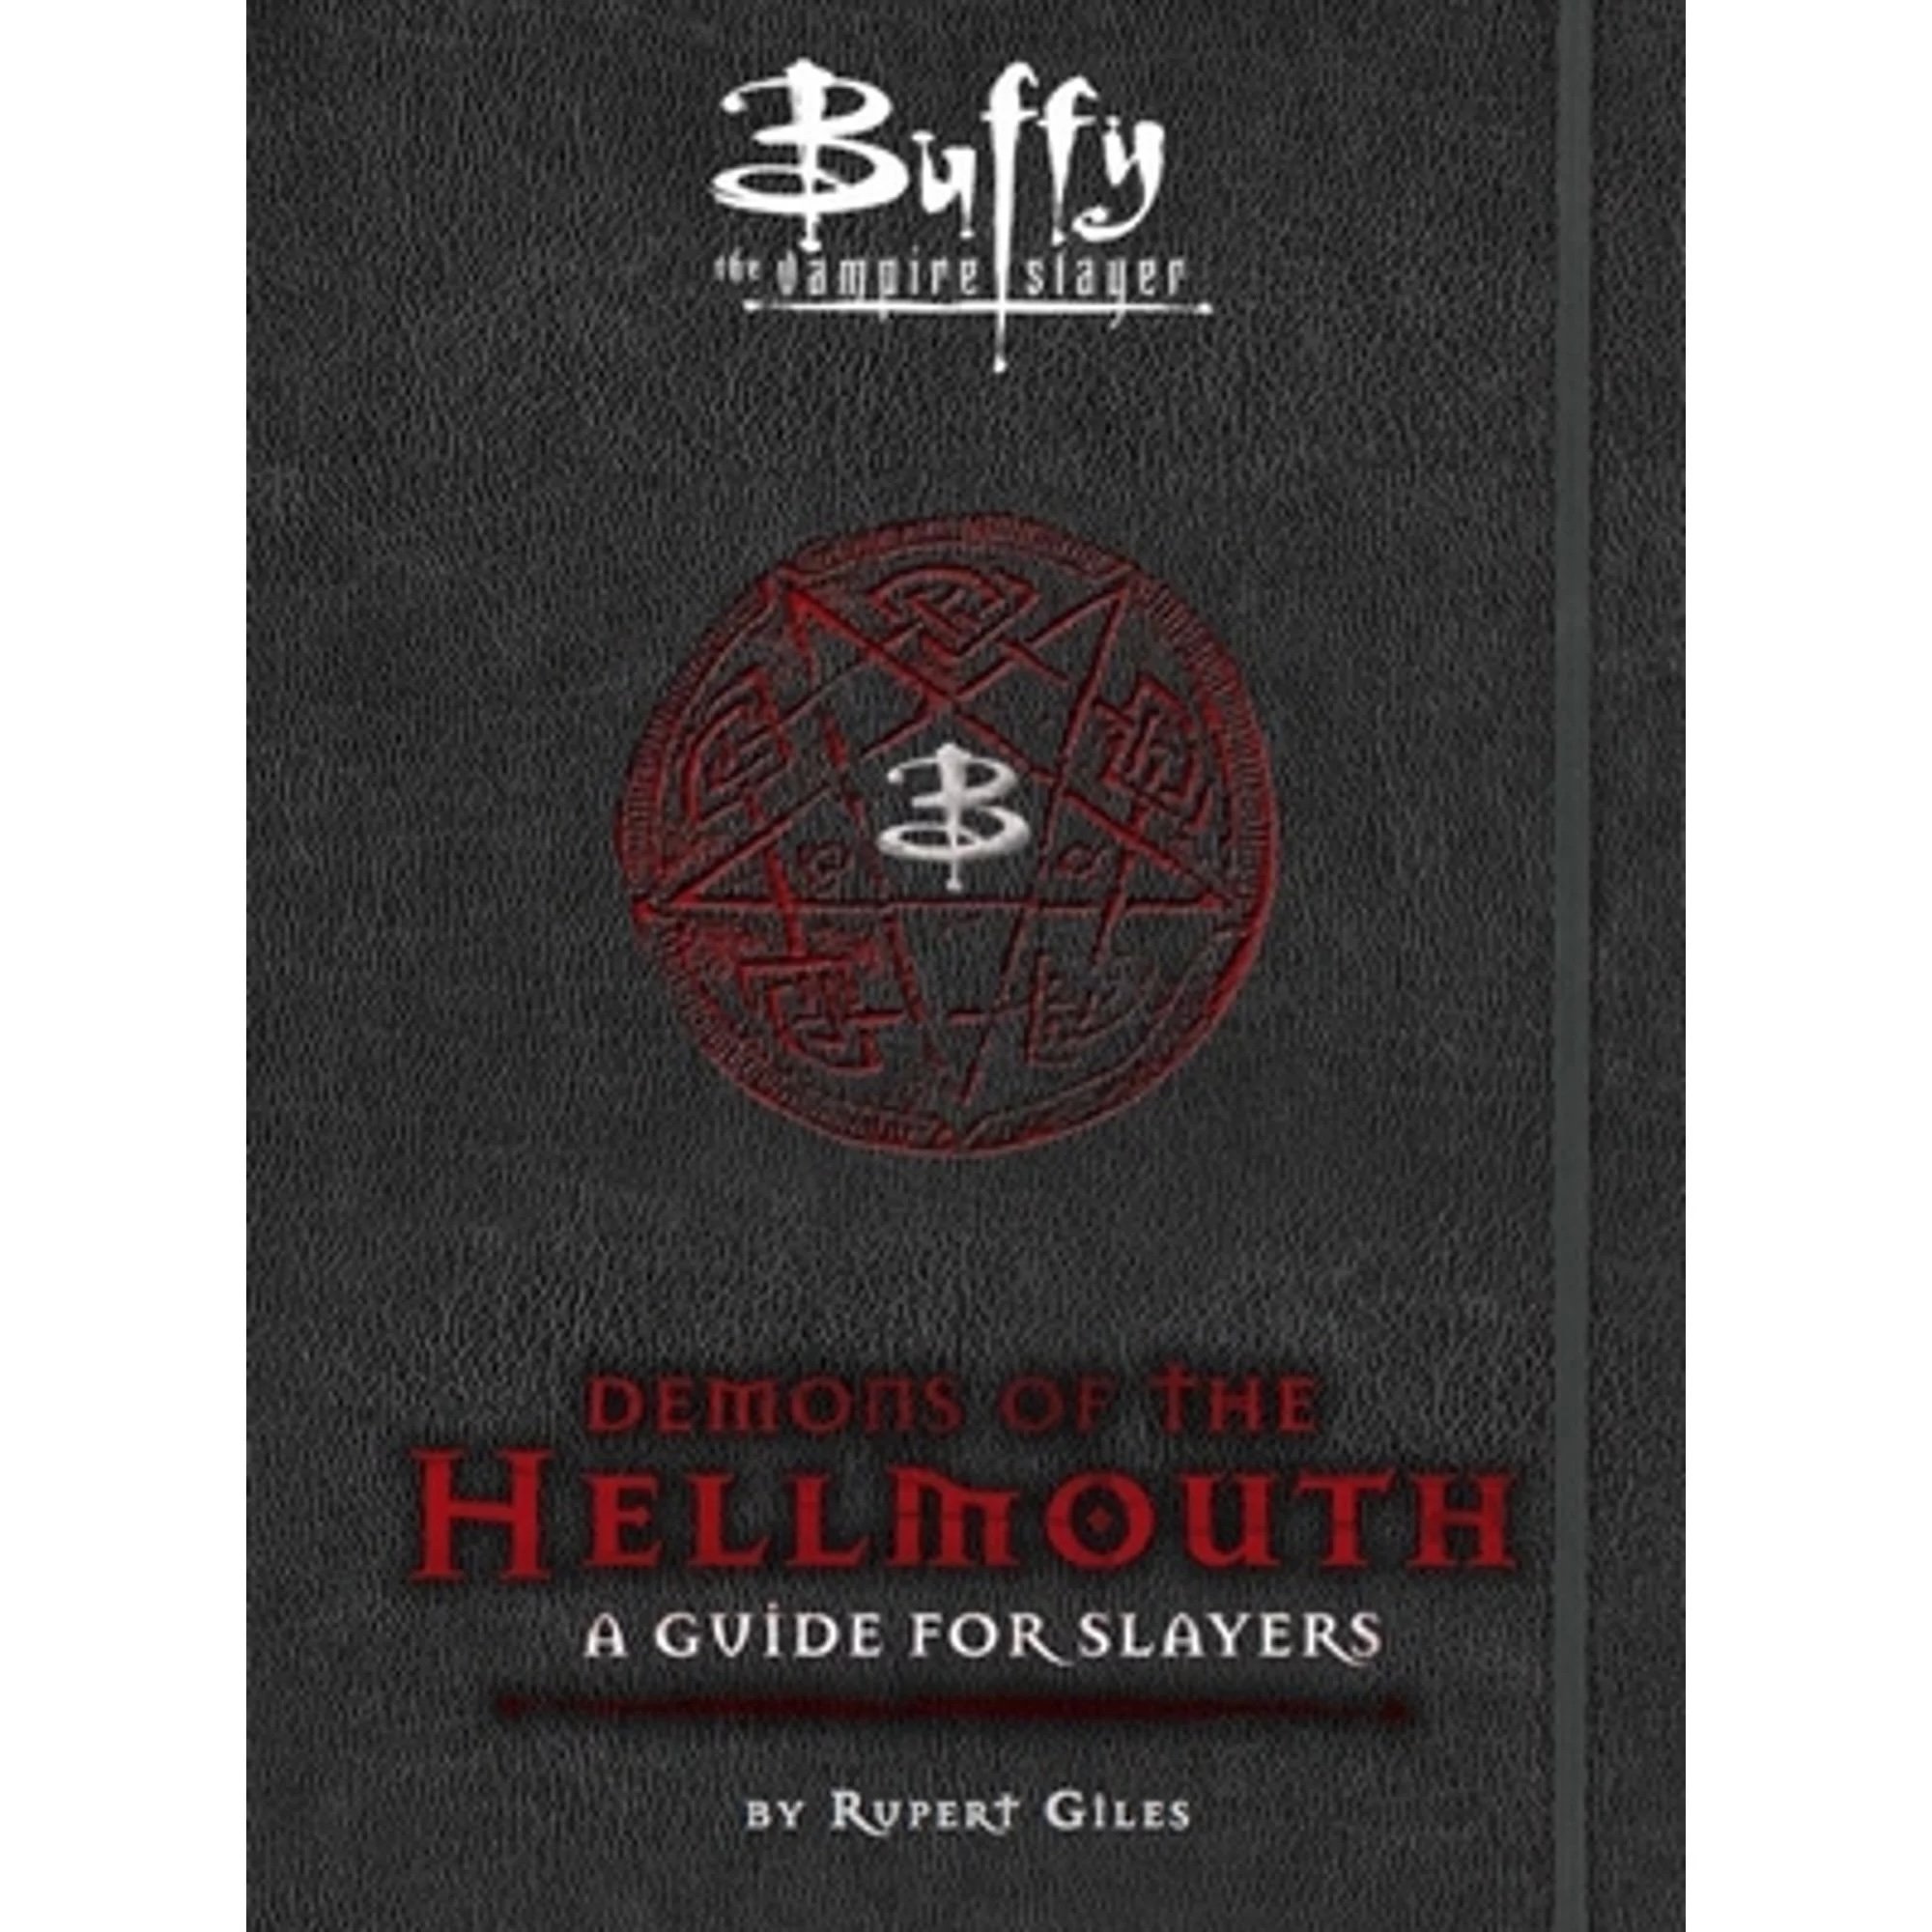 Pre-Owned-Buffy-the-Vampire-Slayer-Demons-of-the-Hellmouth-A-Guide-for-Slayers-Hardcover-9781783293384-by-Nancy-Holder_898fe2ae-9e14-4109-a4db-918815119023.4e5c101ba9bf35e56806a6be6b326dde.jpeg